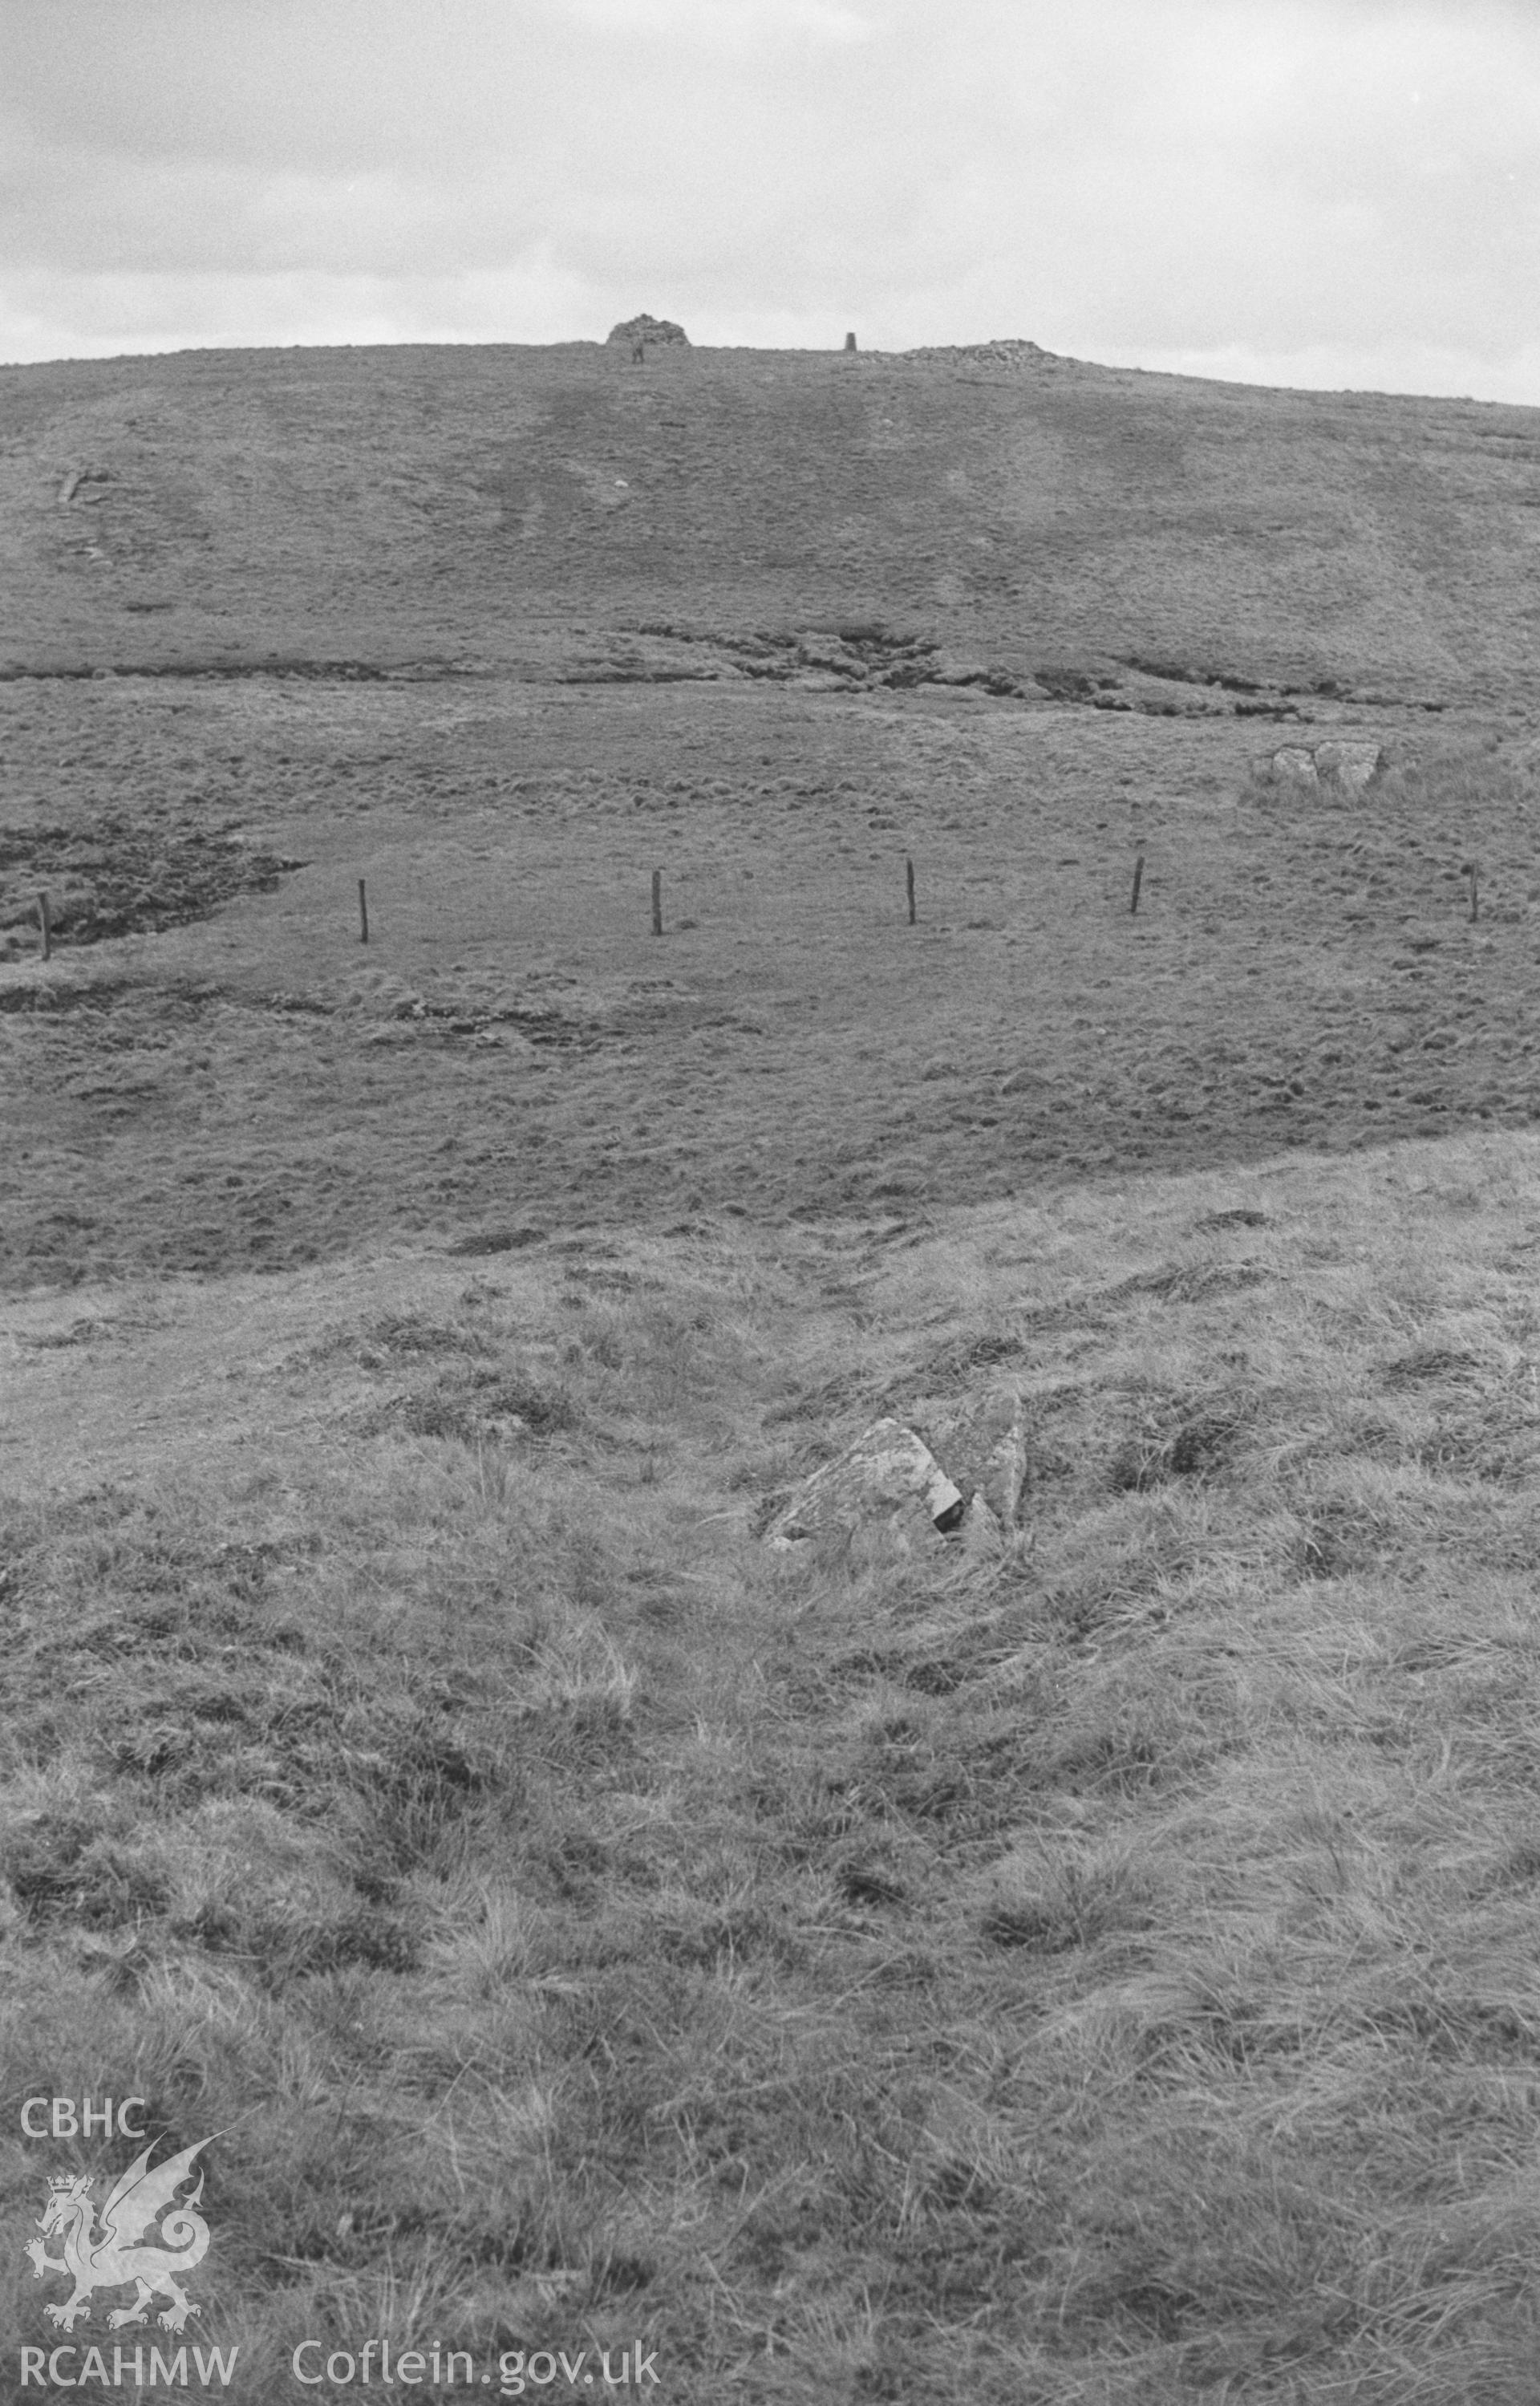 Digital copy of black & white negative showing view looking along the ditch of Gwys-yr-Ychen-Bannog across peat bog to the two large cairns at Garn Gron, near Tregaron. Photographed by Arthur O. Chater in April 1966 looking east south east from SN 738 612.